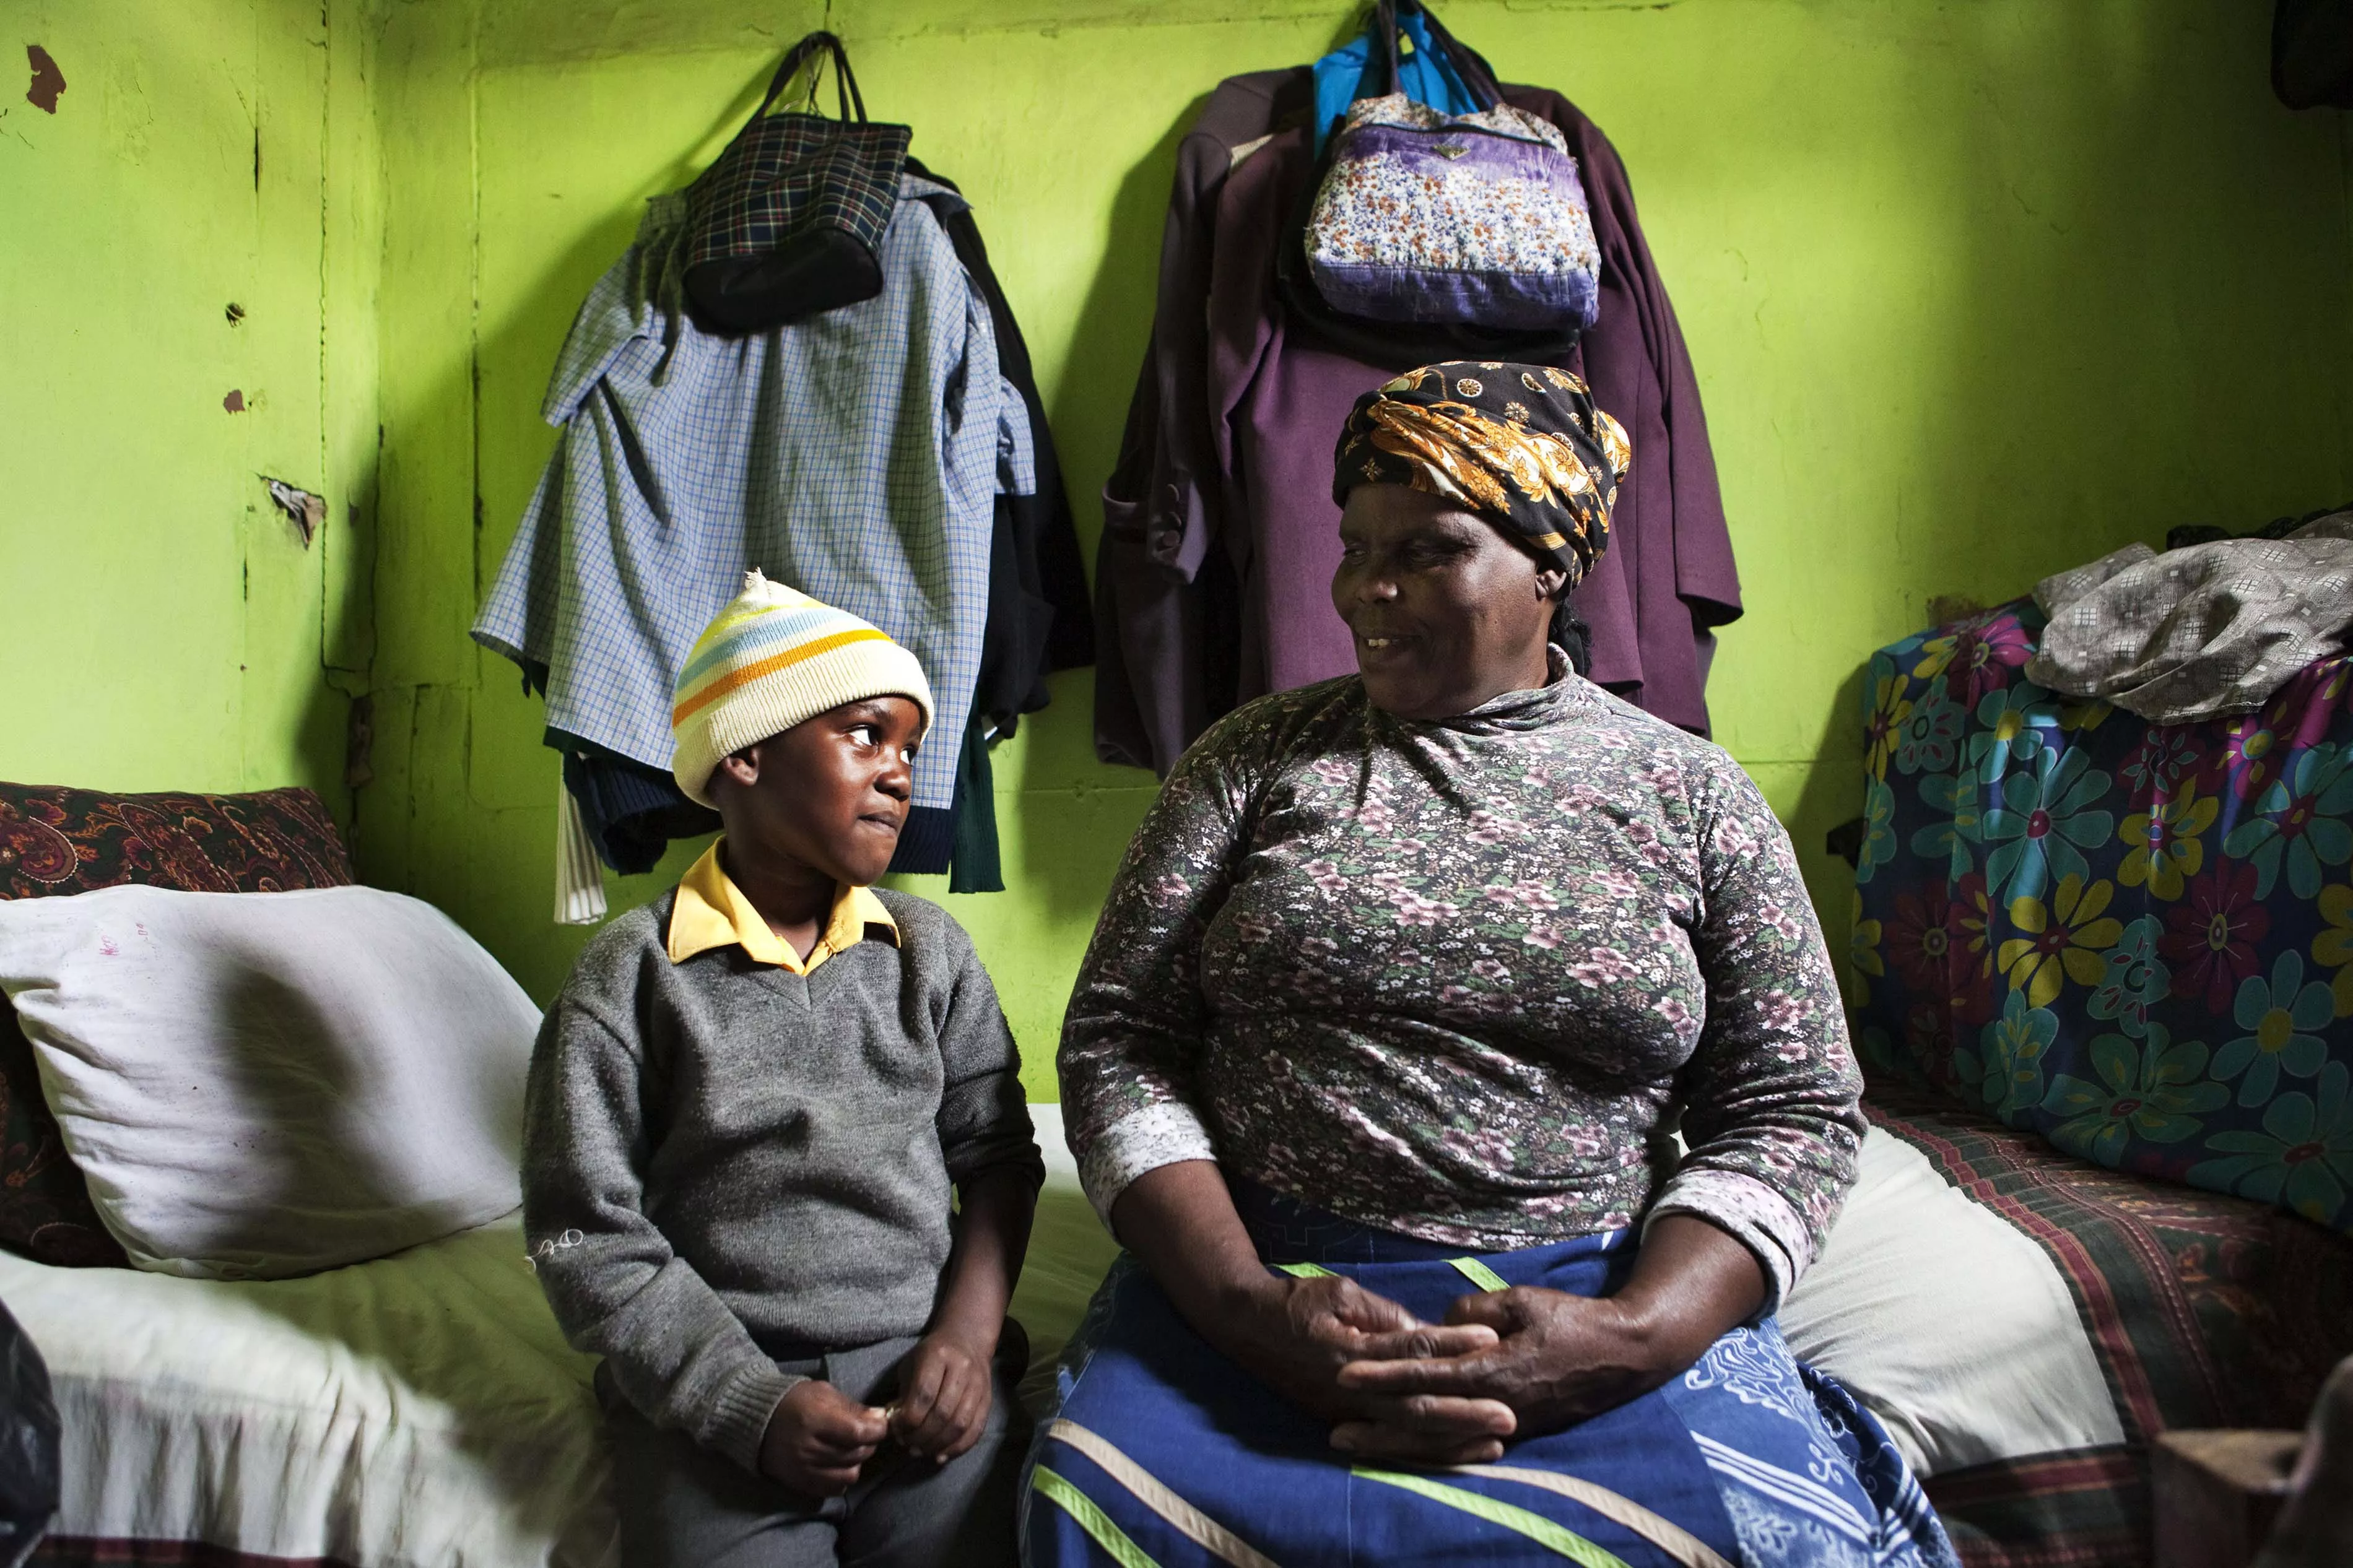 Thenjiwe Madzinga, 66, sits on with her grandson Thina Gxotelwa in the small room they share in a shack in Cape Town's Khayelitsha township, February 23, 2010. Madzinga cares for her five grandchildren, including four who were orphaned when Madzinga's own daughter died from AIDS in 2002. Some 5.5 million people live with HIV/AIDS in South Africa - more than in any other country - placing a heavy burden on a society still struggling with the legacy of Apartheid. 